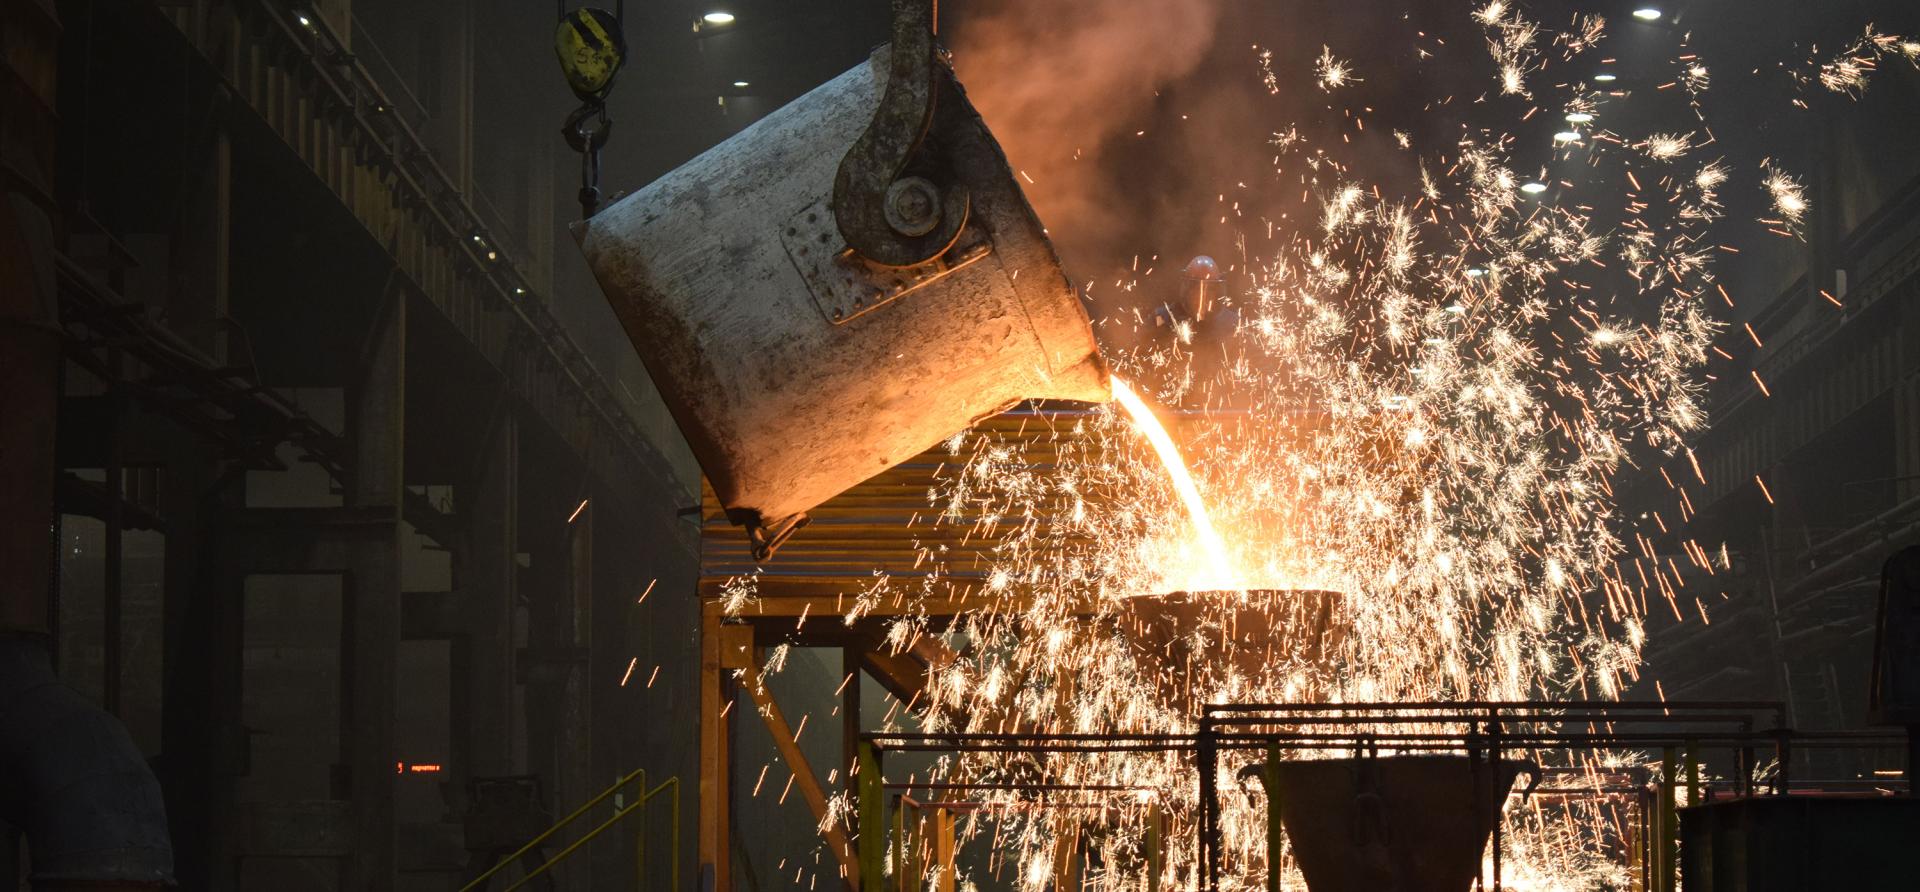 BHP and Tata Steel reinforce commitment to decarbonise steelmaking